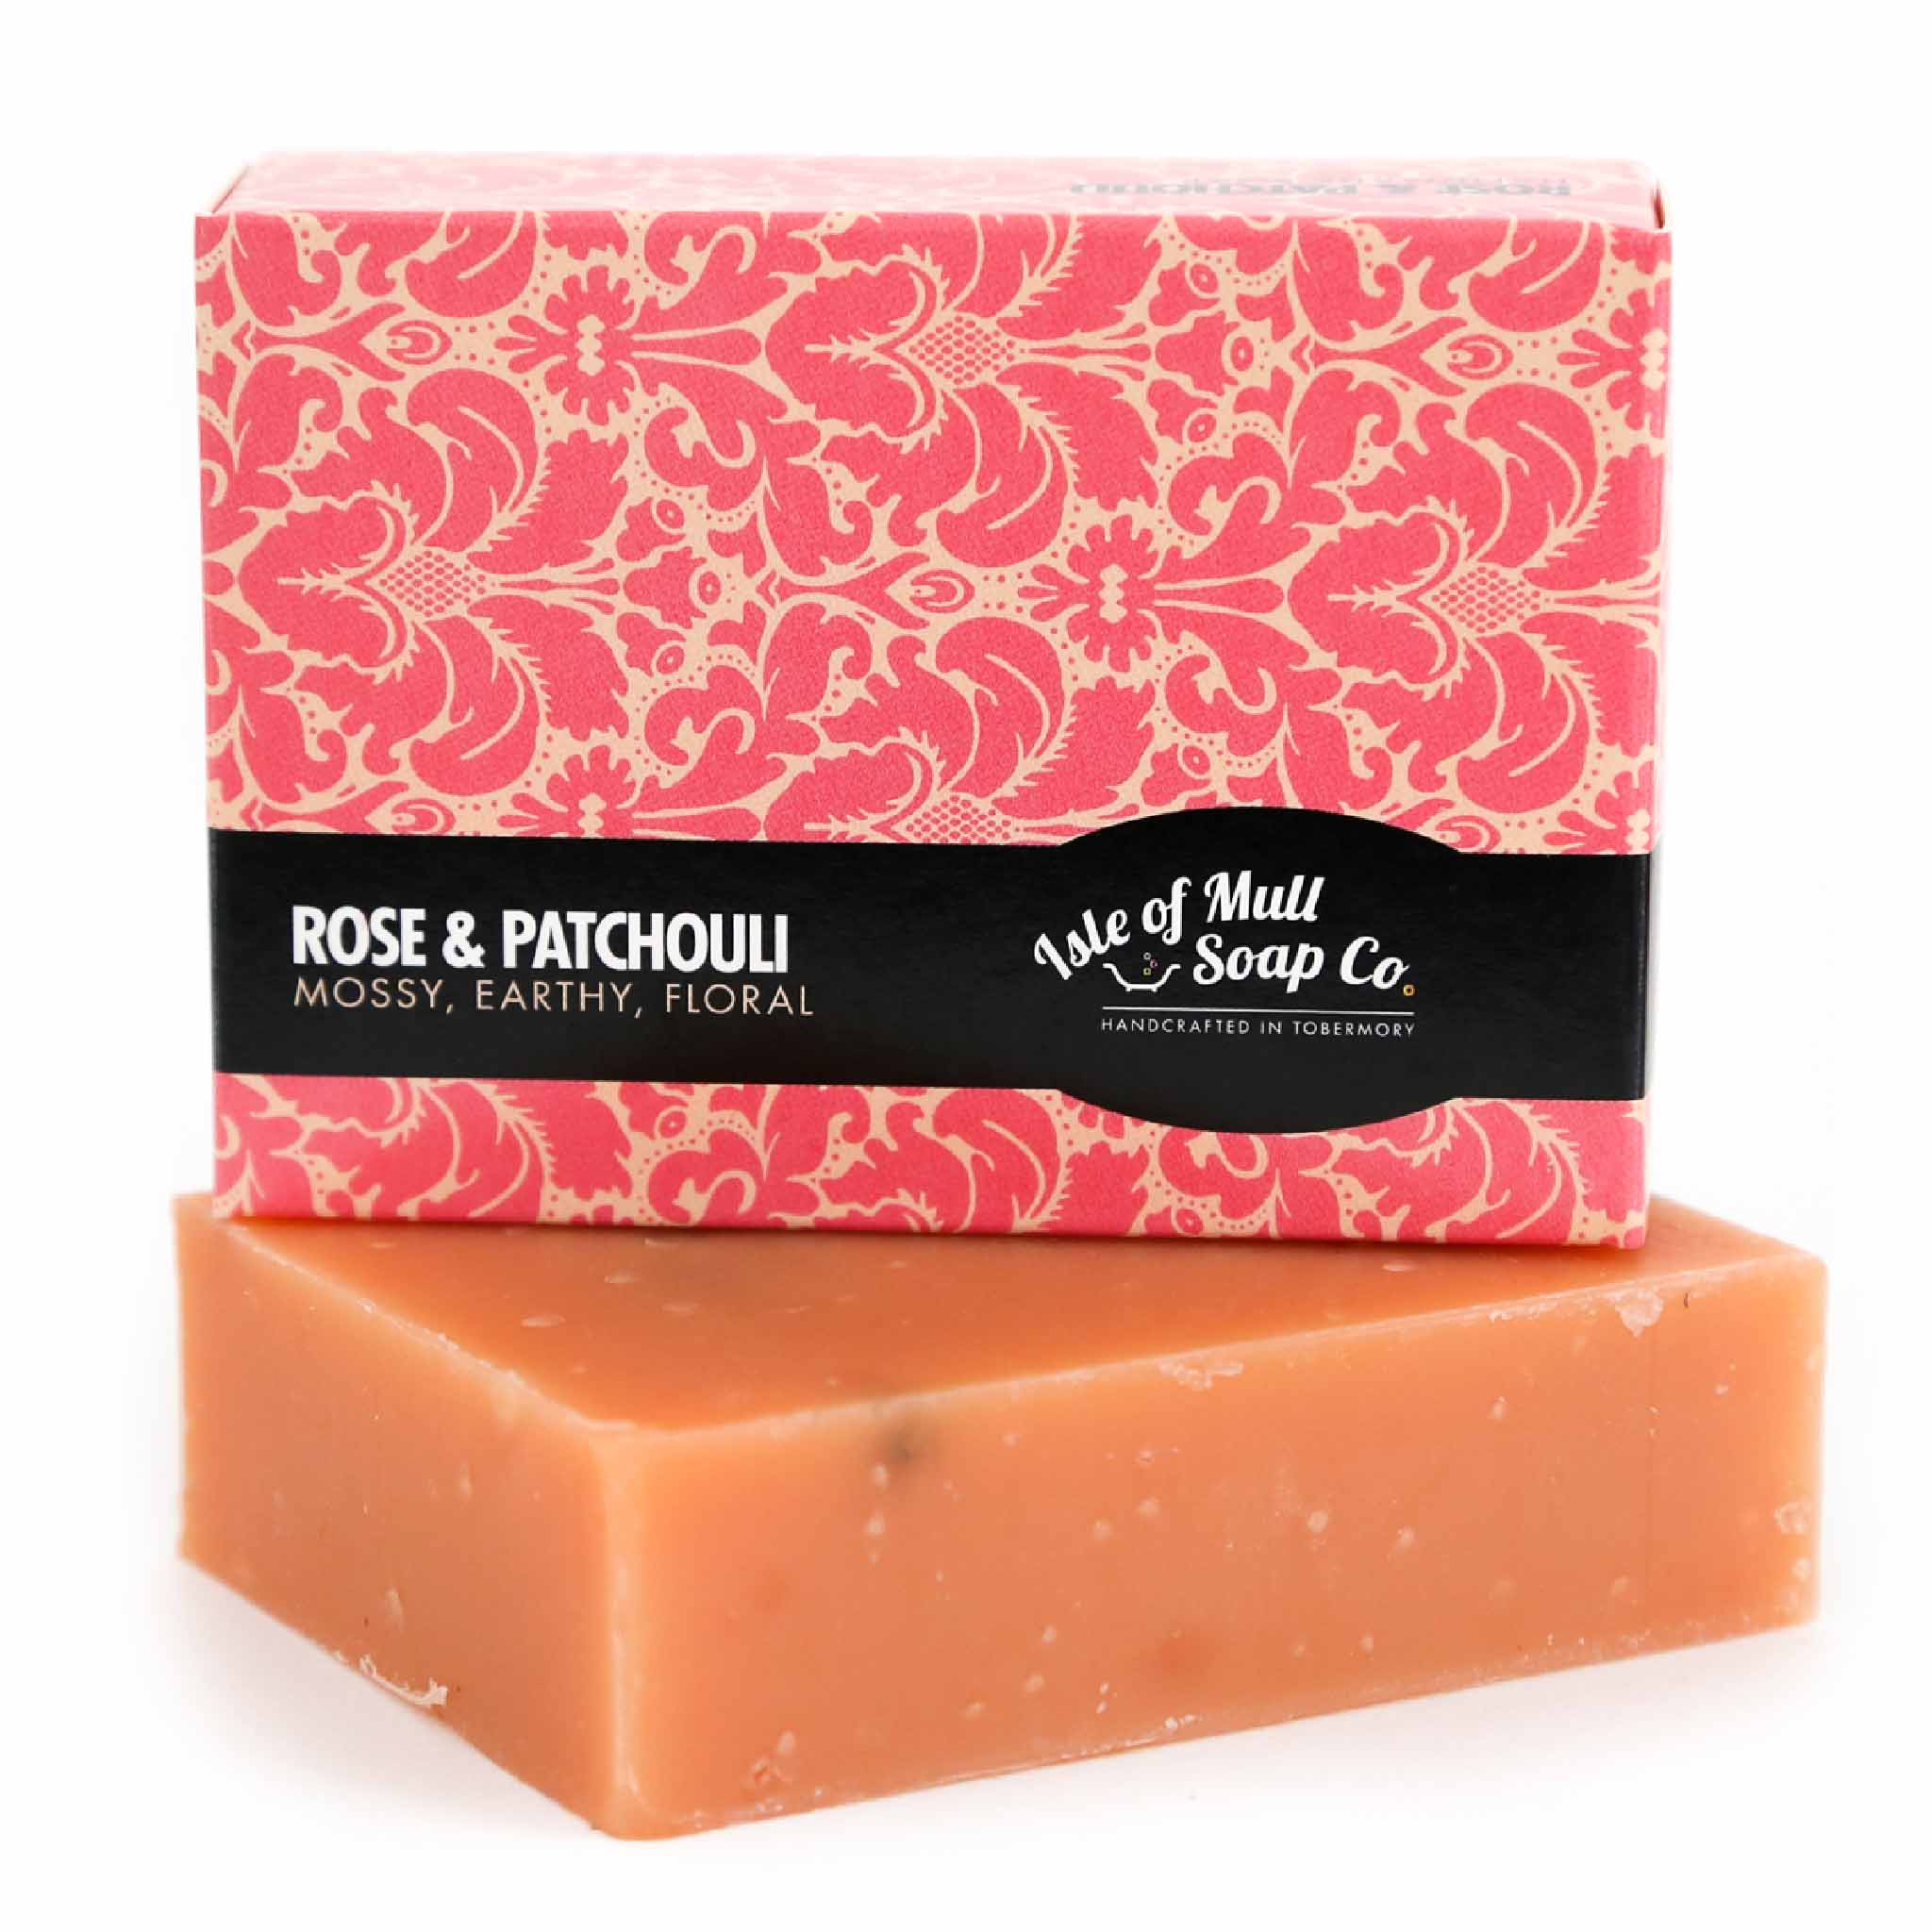 Rose and Patchouli Isle of Mull Soap